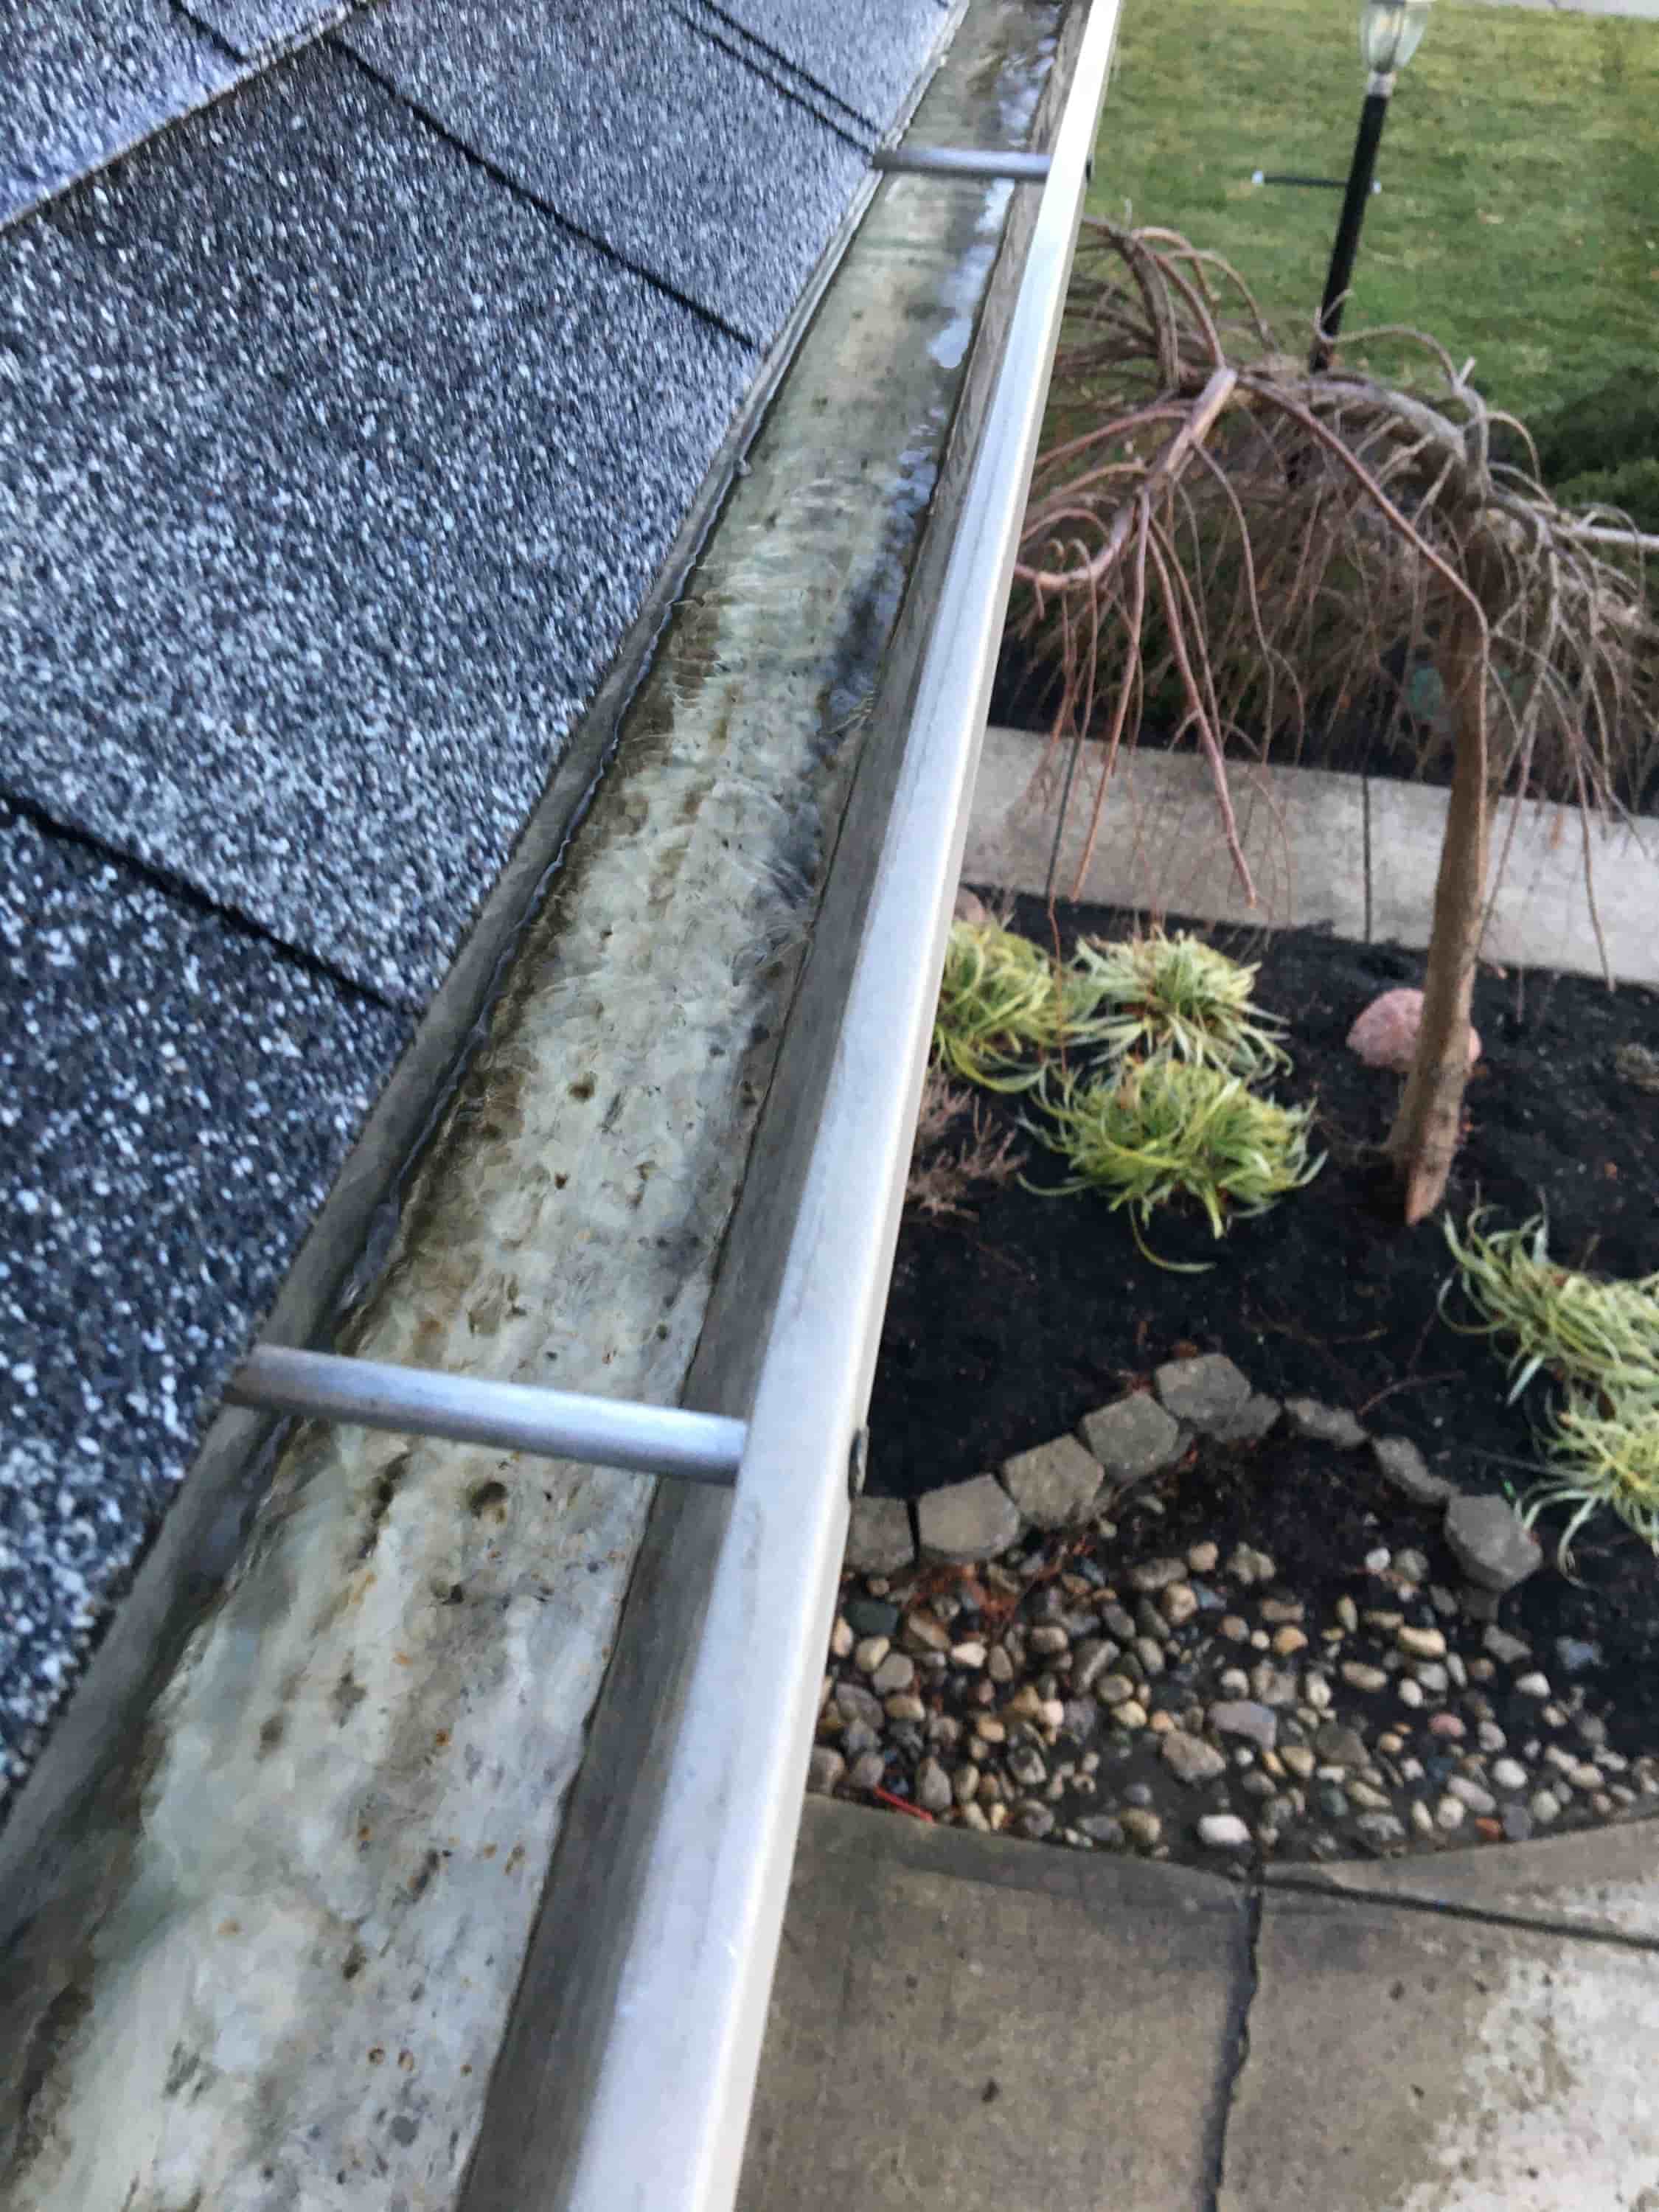 gutter cleaning companies hate this